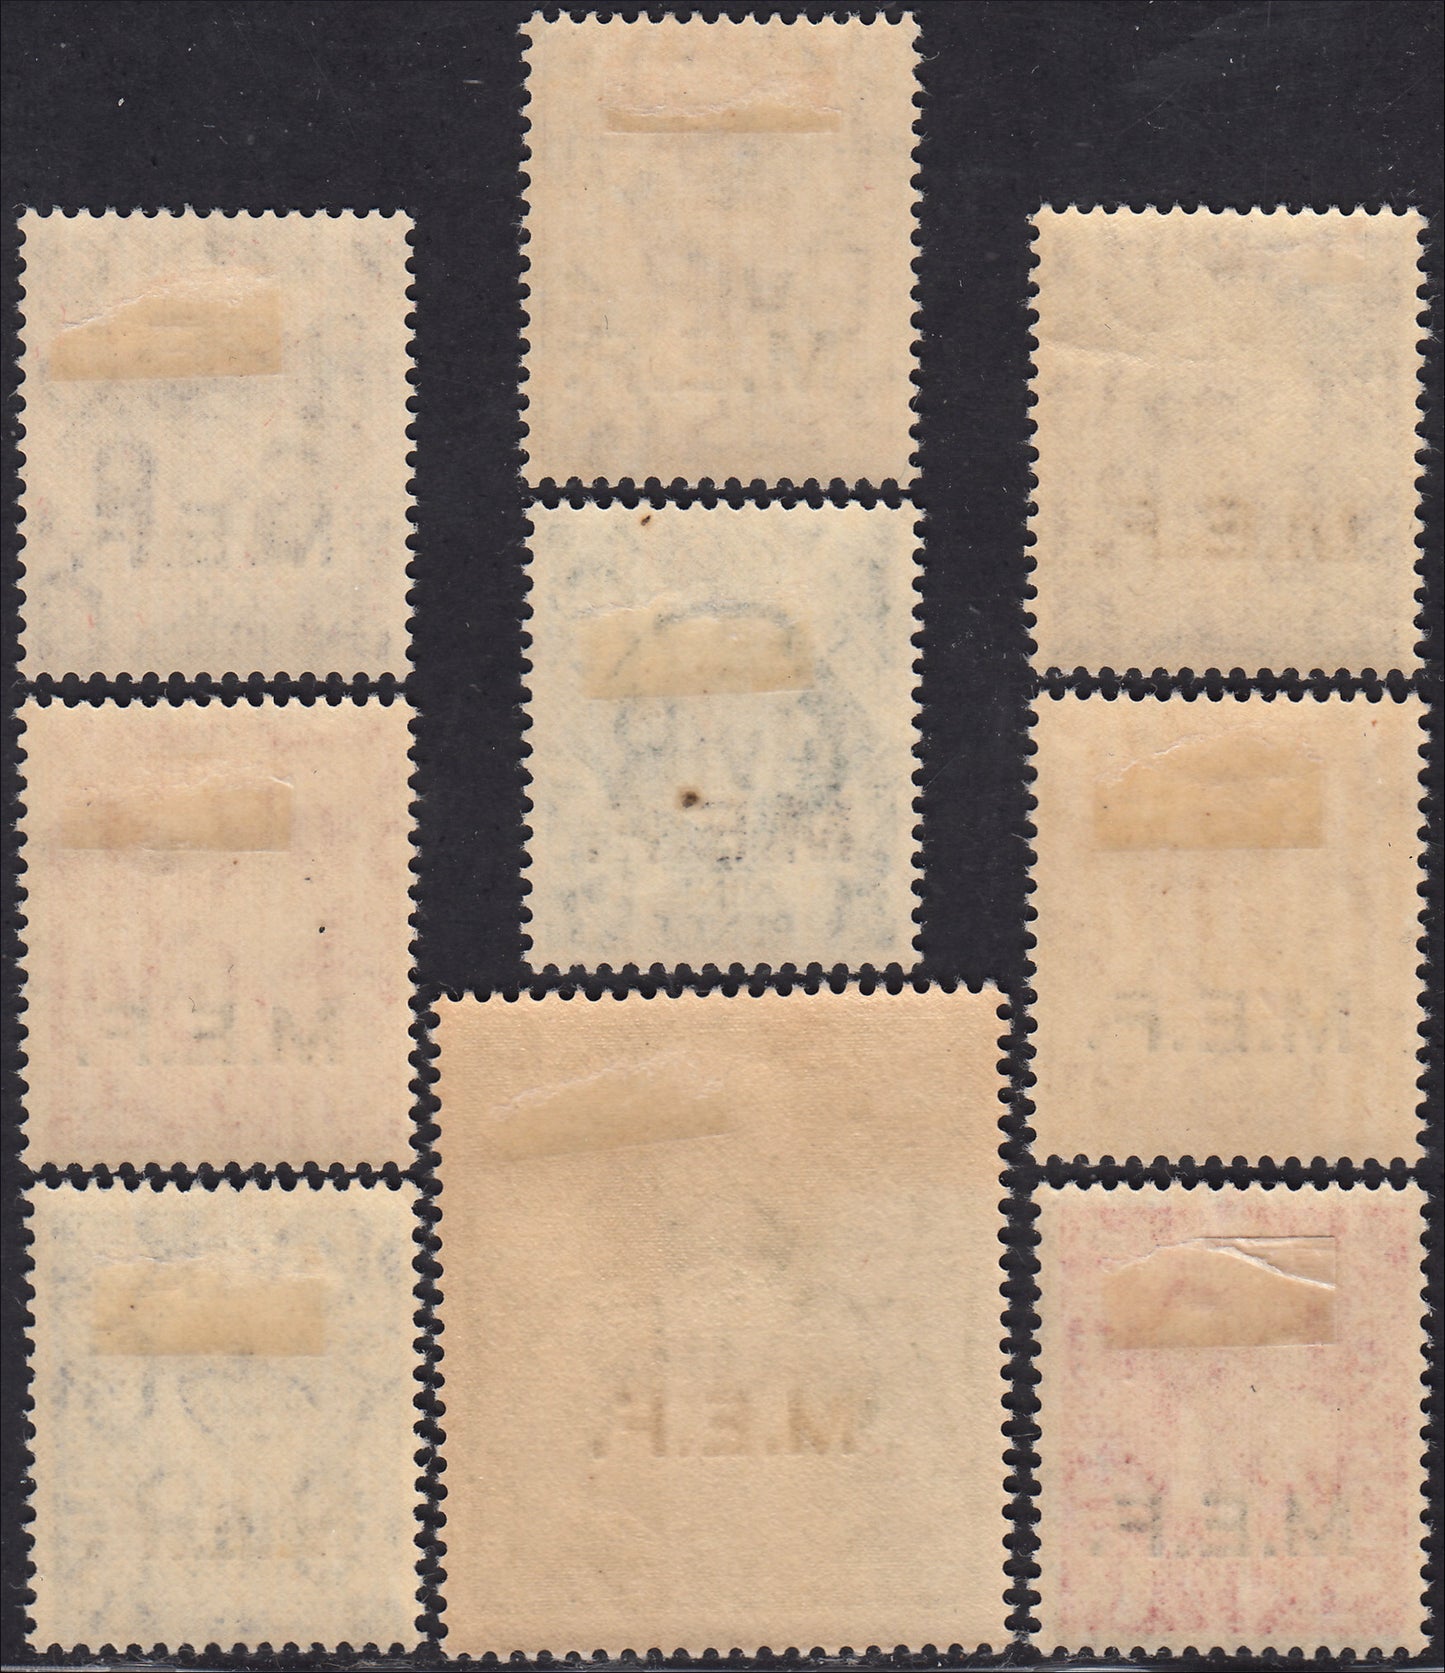 ZZ954/5 1942/47 - British occupation, stamps and tax postmarks of Great Britain overprinted MEF, small lot of 14 new stamps with original gum (6/14, Tax 1/5)